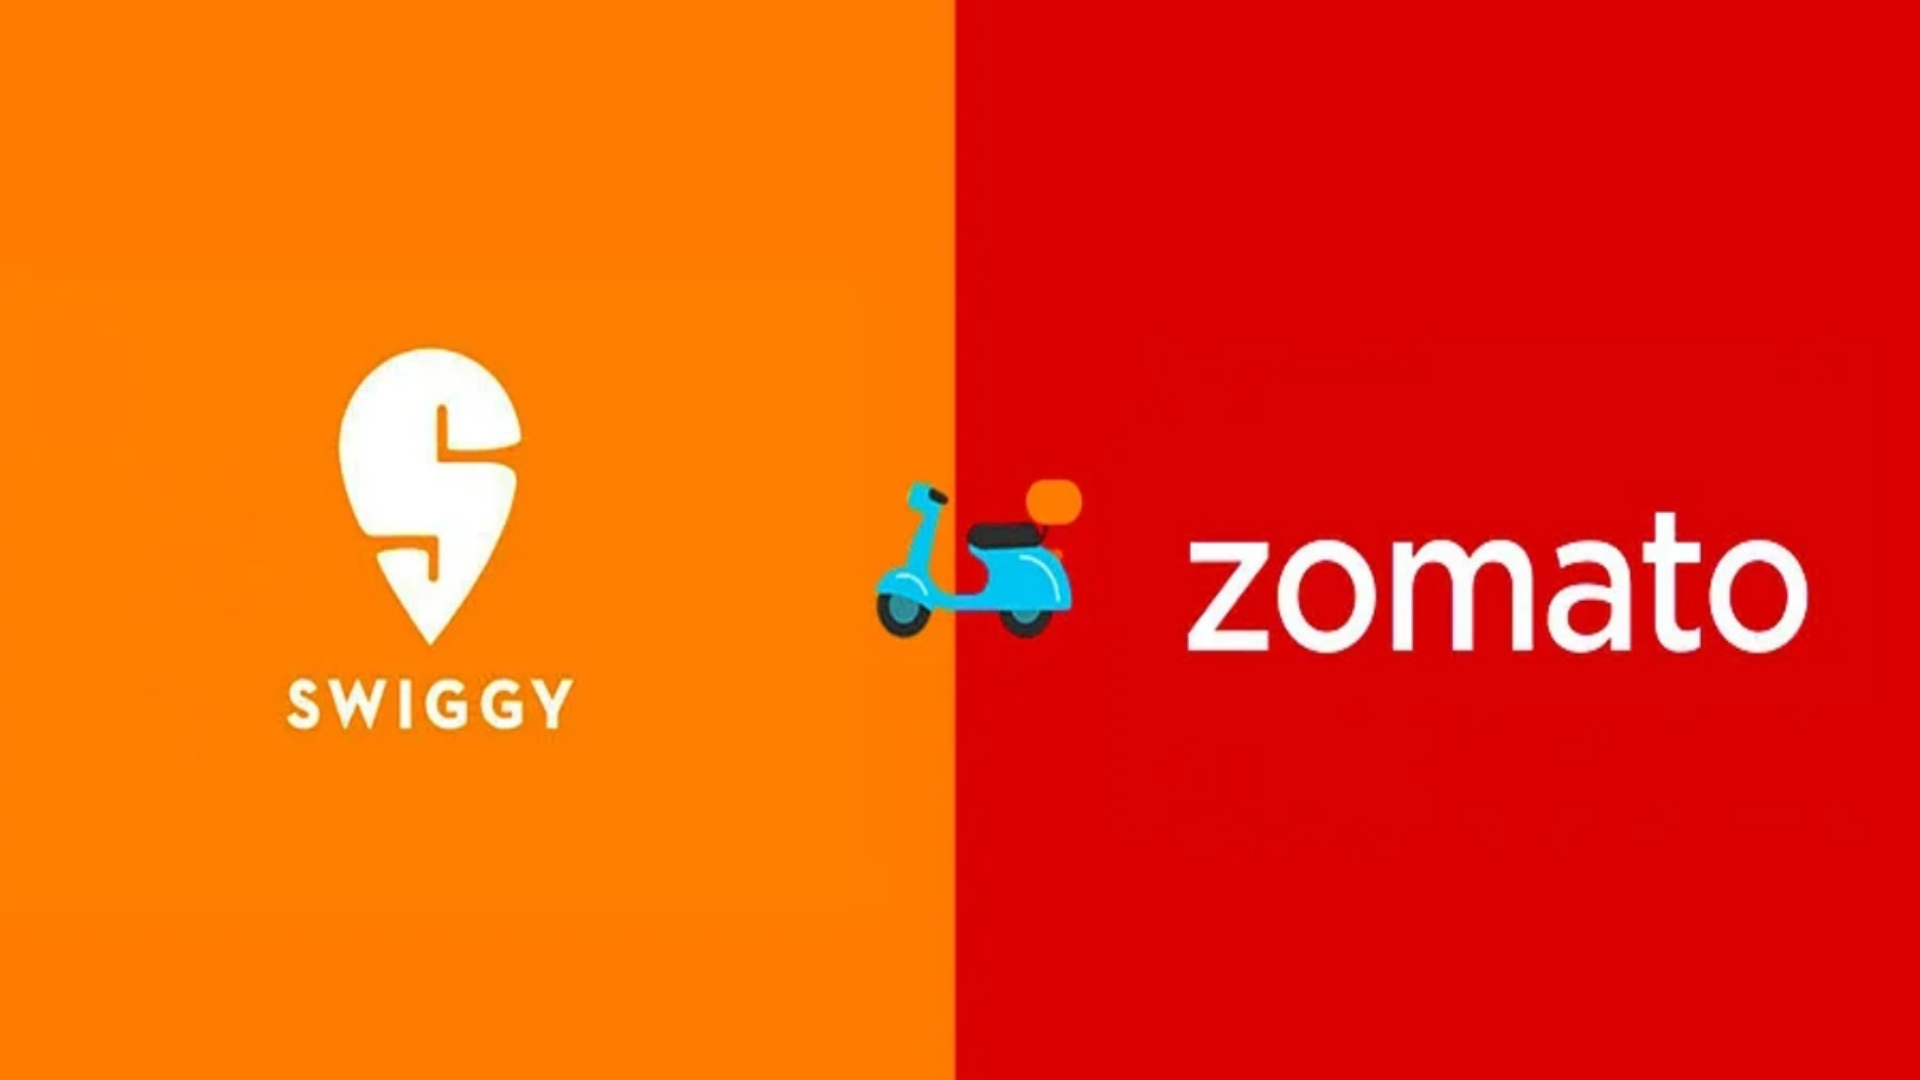 “Its Fake”: Swiggy Responds Over The Viral Post Over Zomato